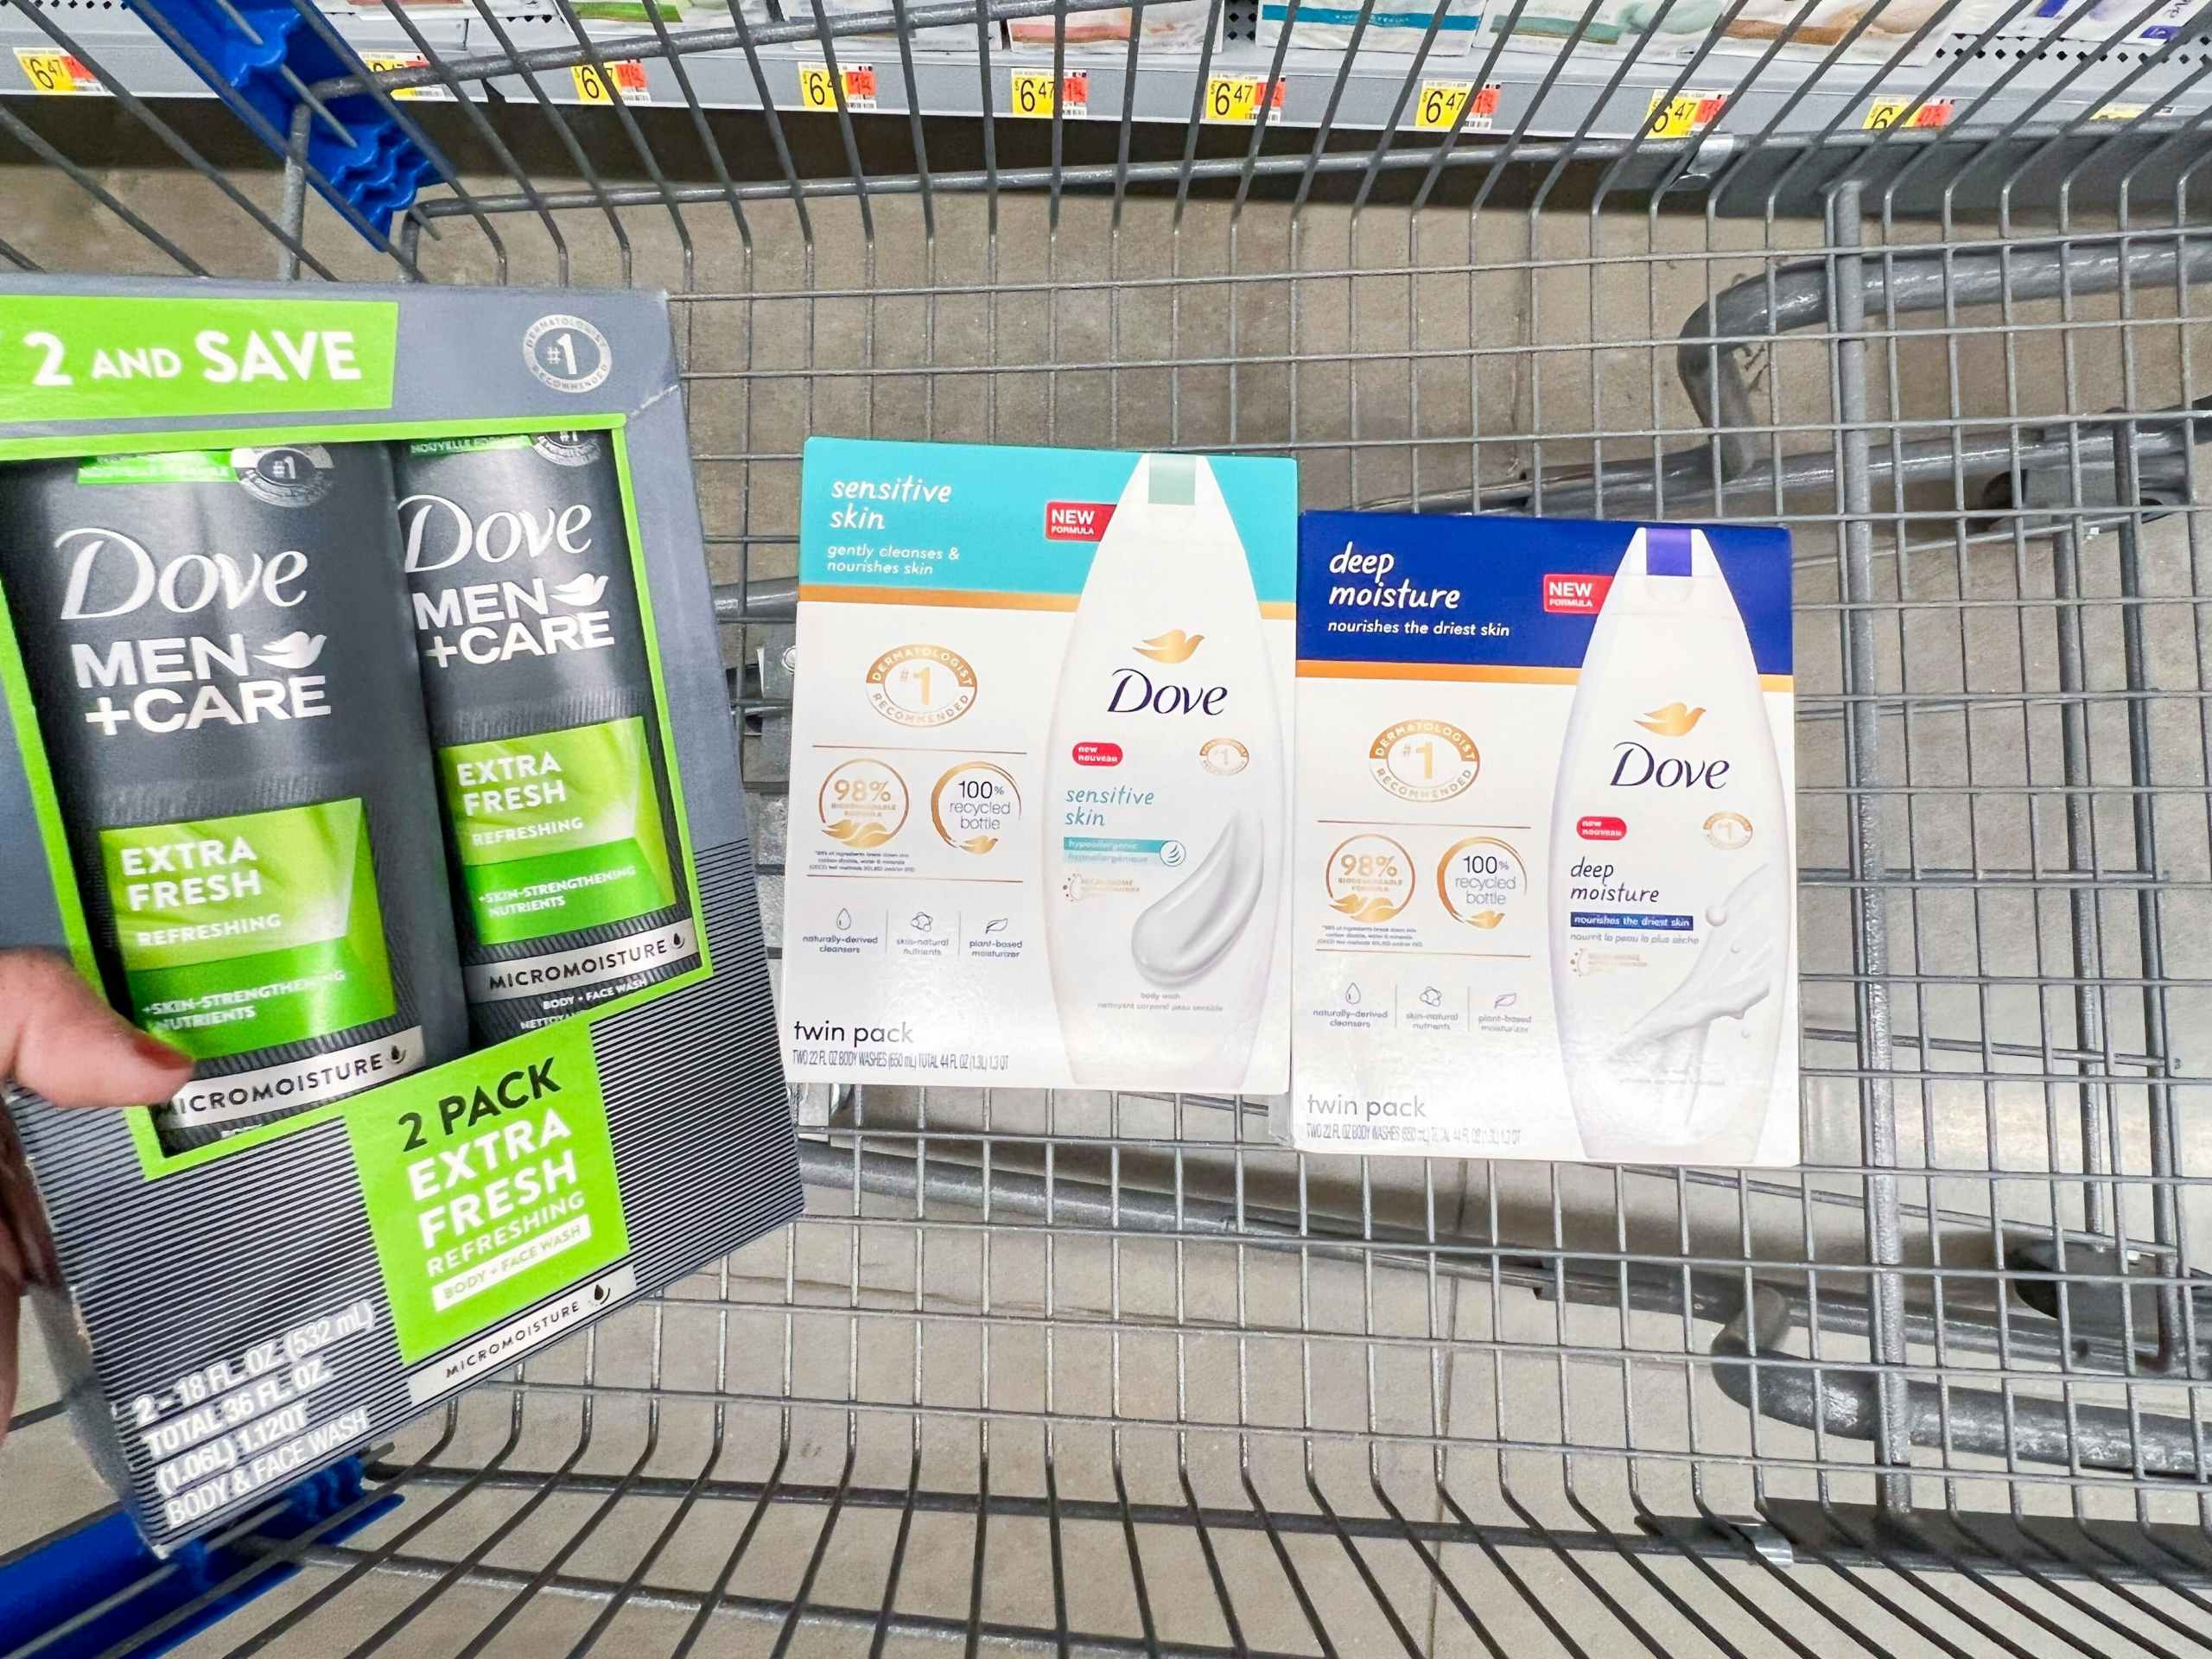 boxes of two-pack Dove body wash in Walmart shopping cart